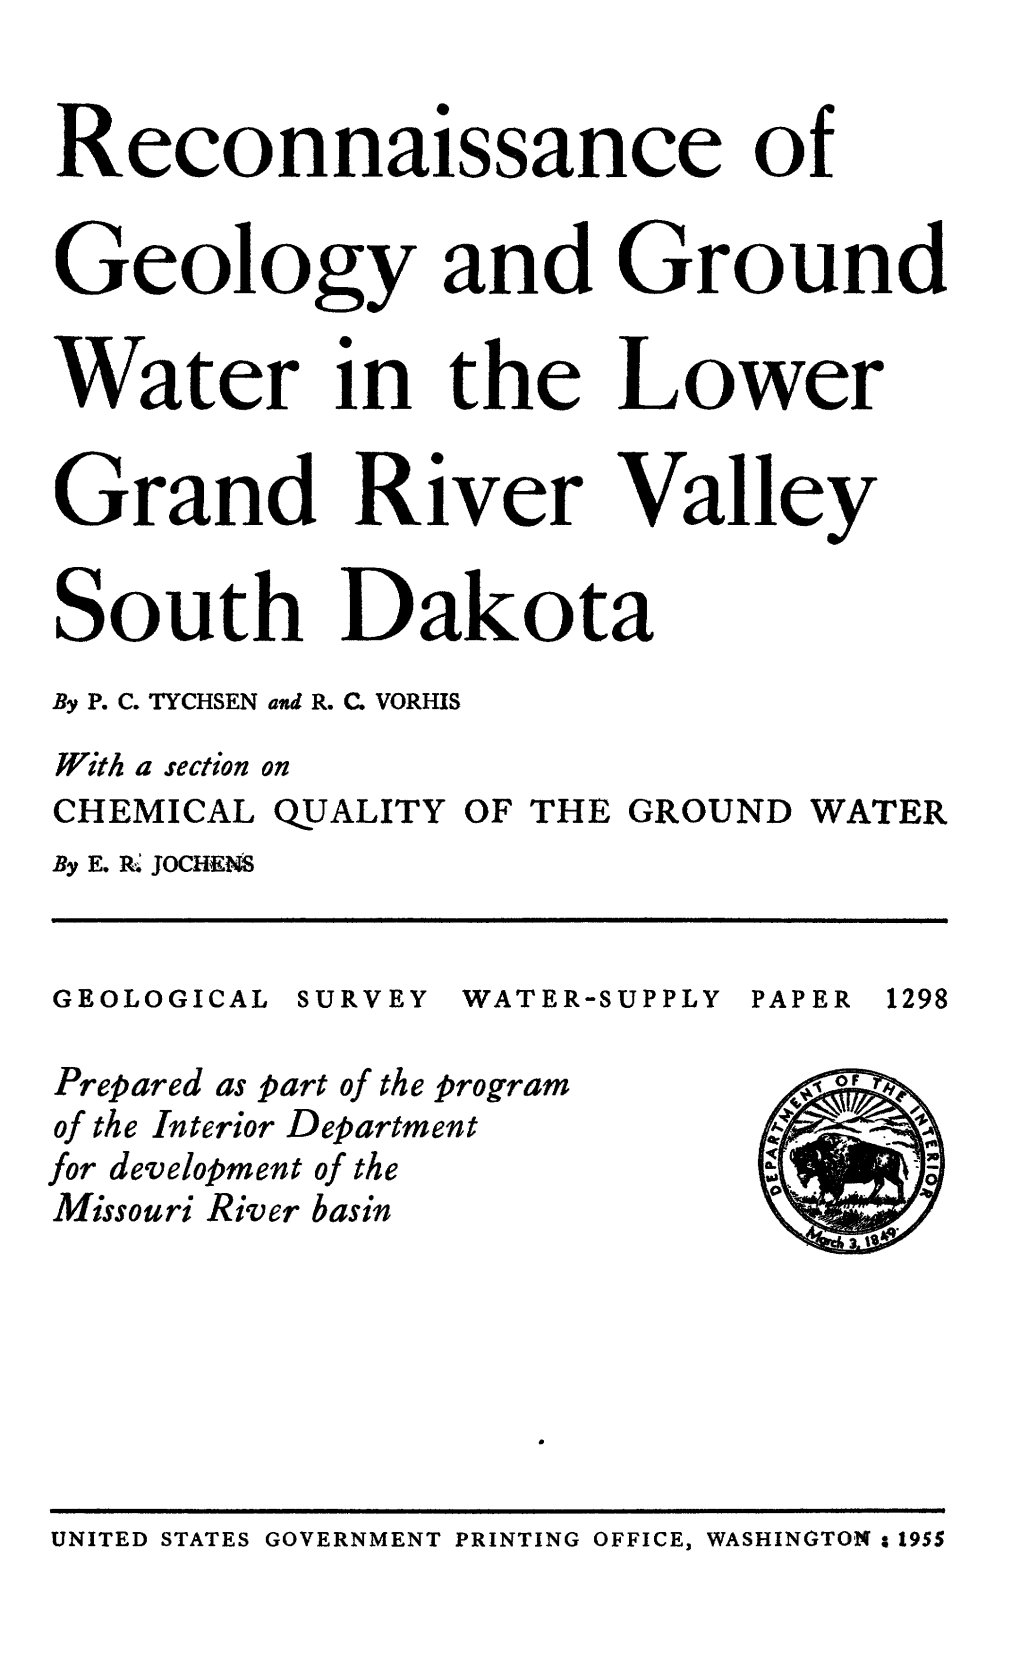 Reconnaissance of Geology and Ground Water in the Lower Grand River Valley South Dakota